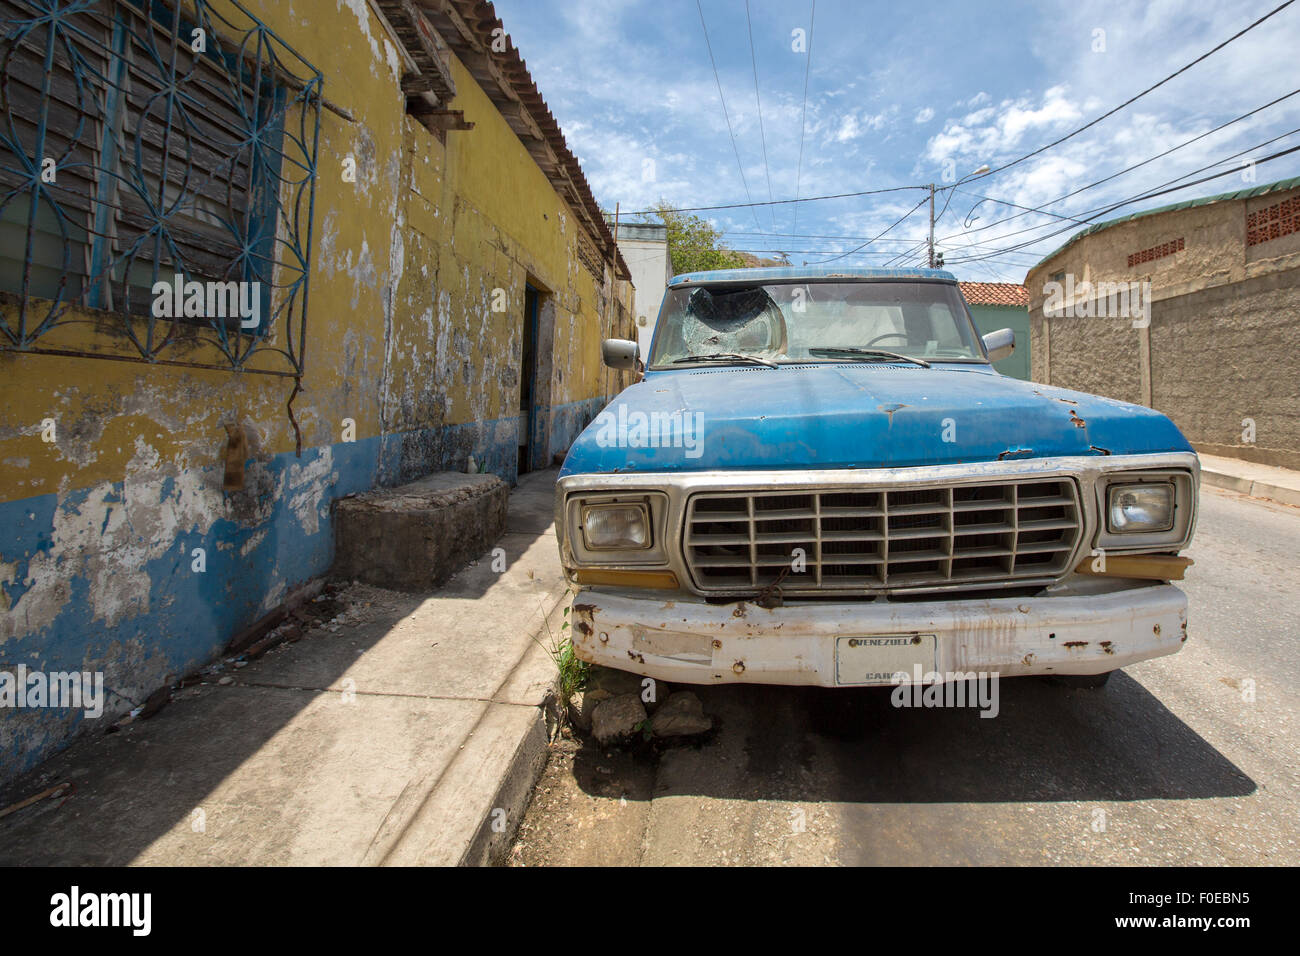 Rusted blue vintage car with smashed window parked in dirty street of Margarita Island against a blue sky. Venezuela Stock Photo